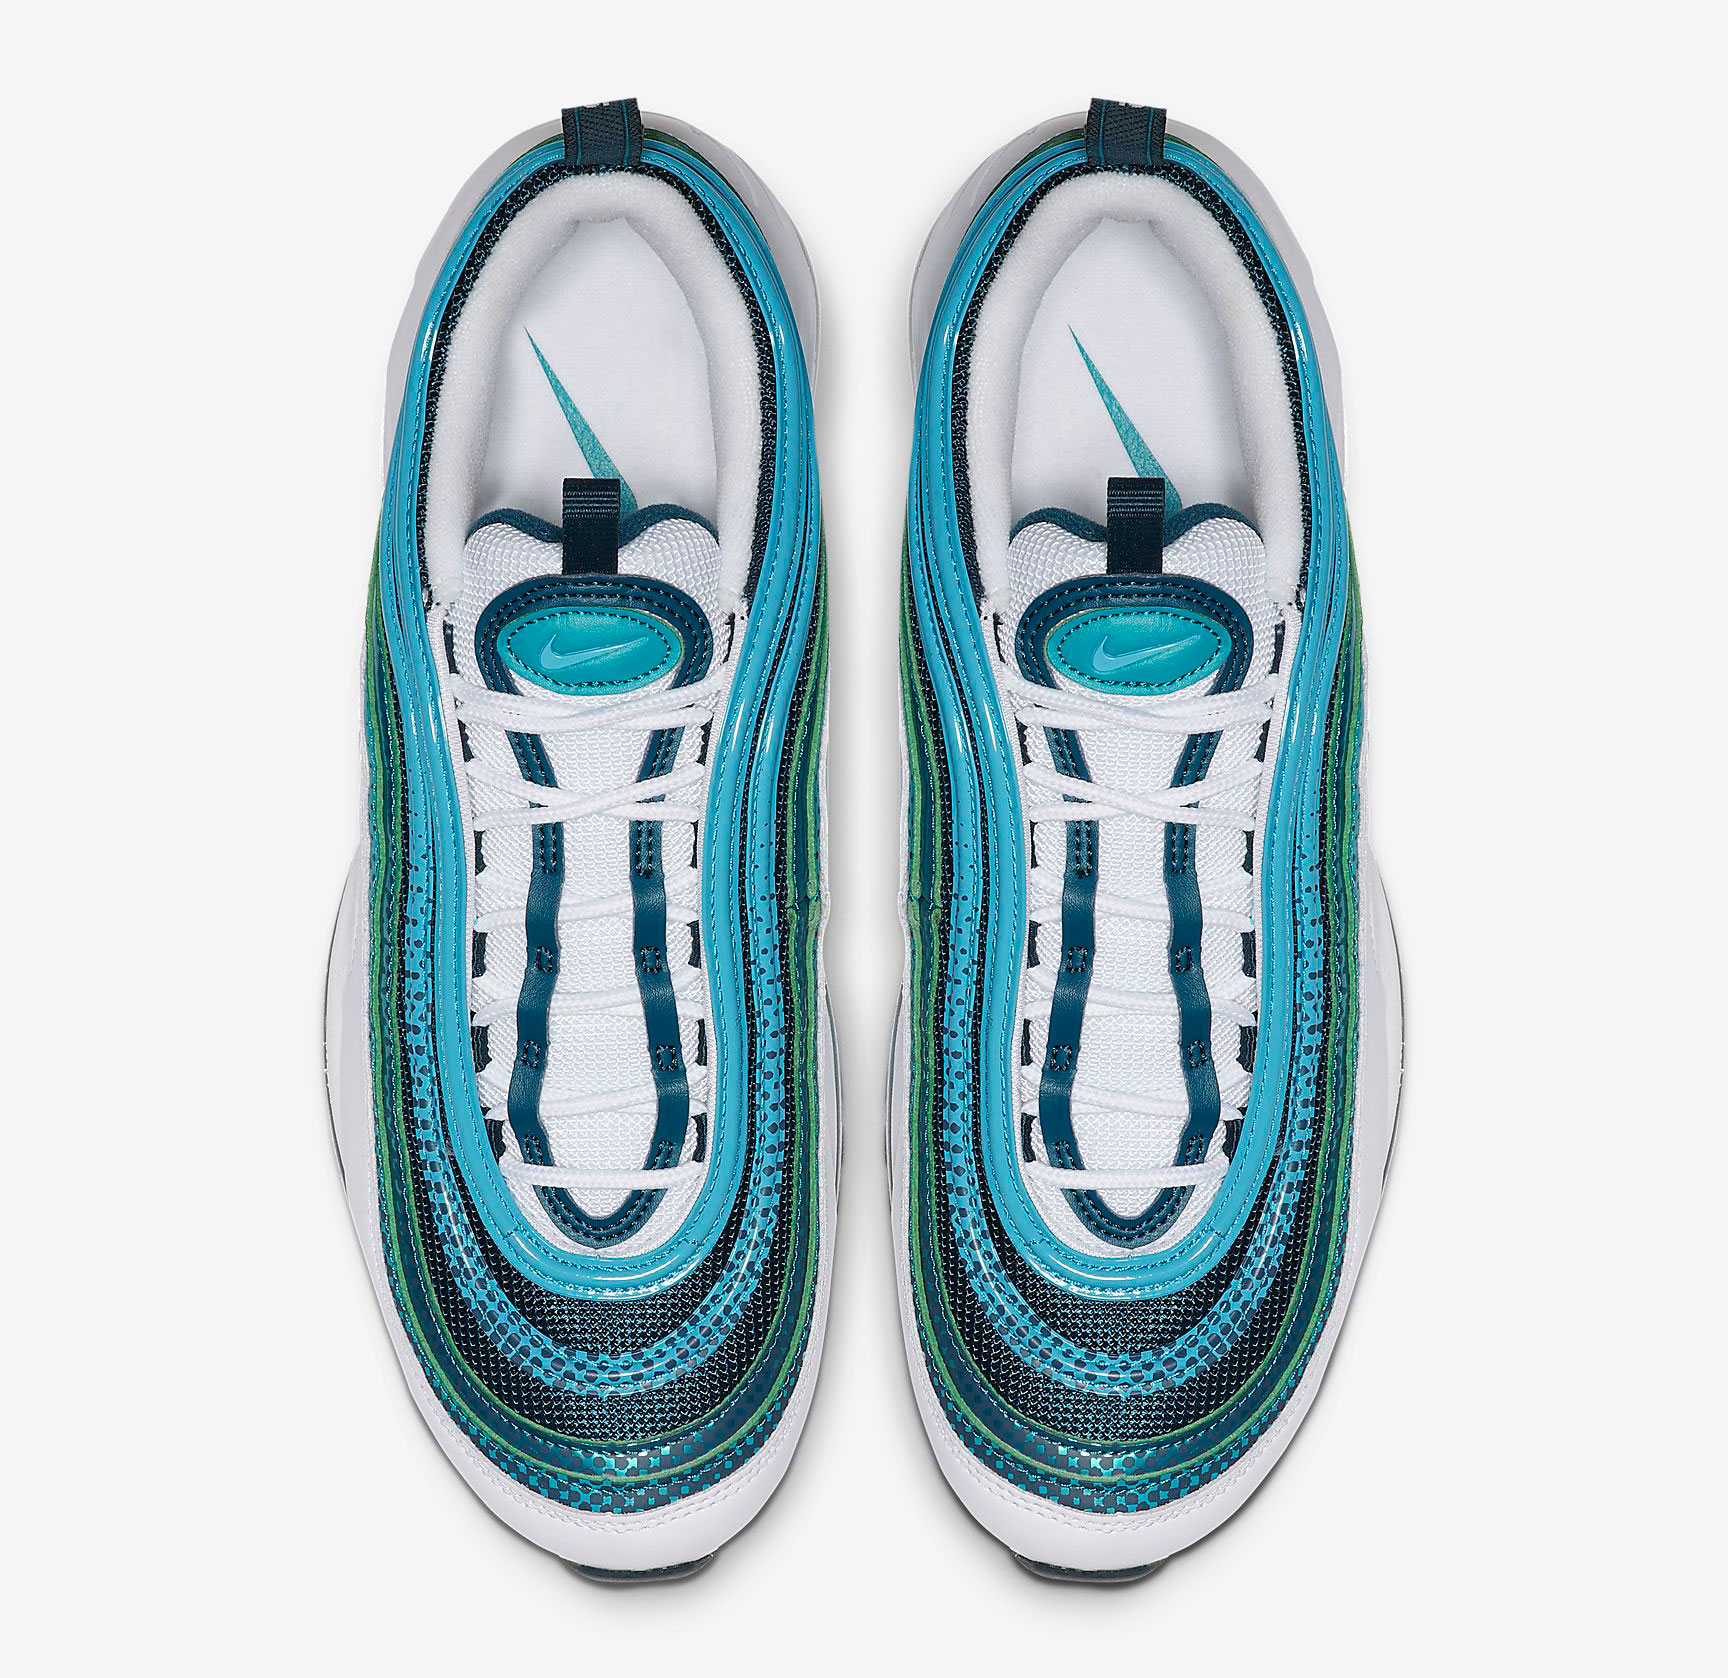 Nike Air Max 97 Nightshade Spirit Teal Available Now | SneakerFits.com